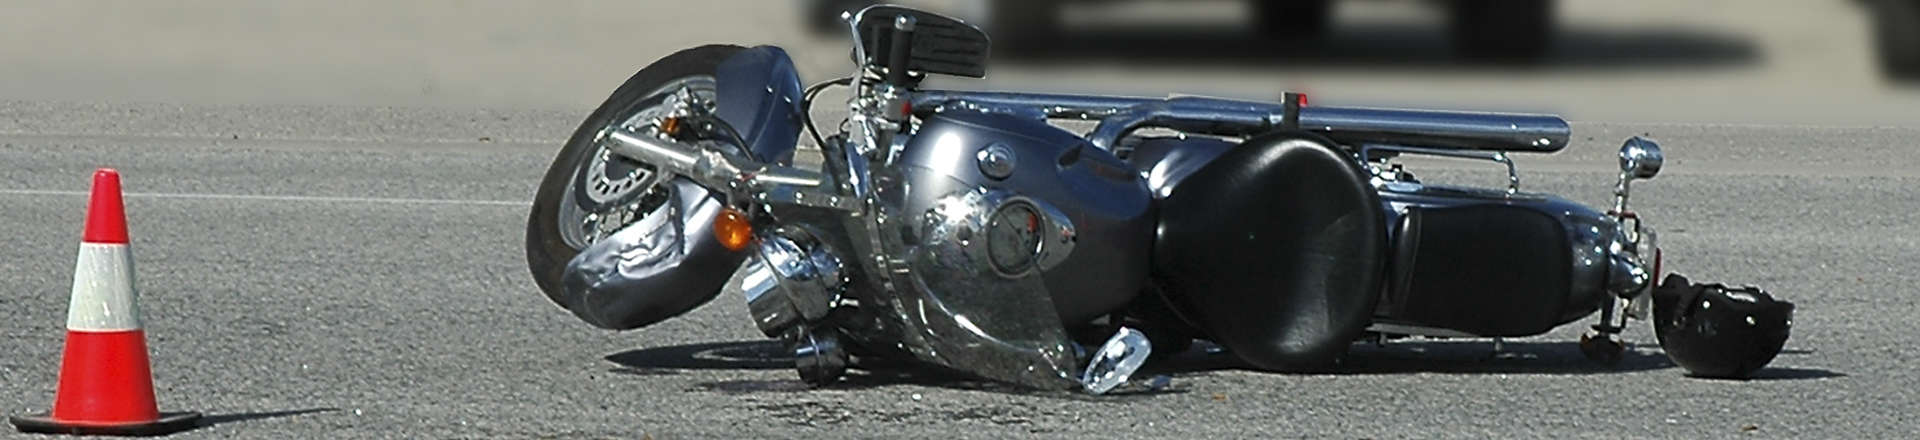 a motorcycle on a road after an accident